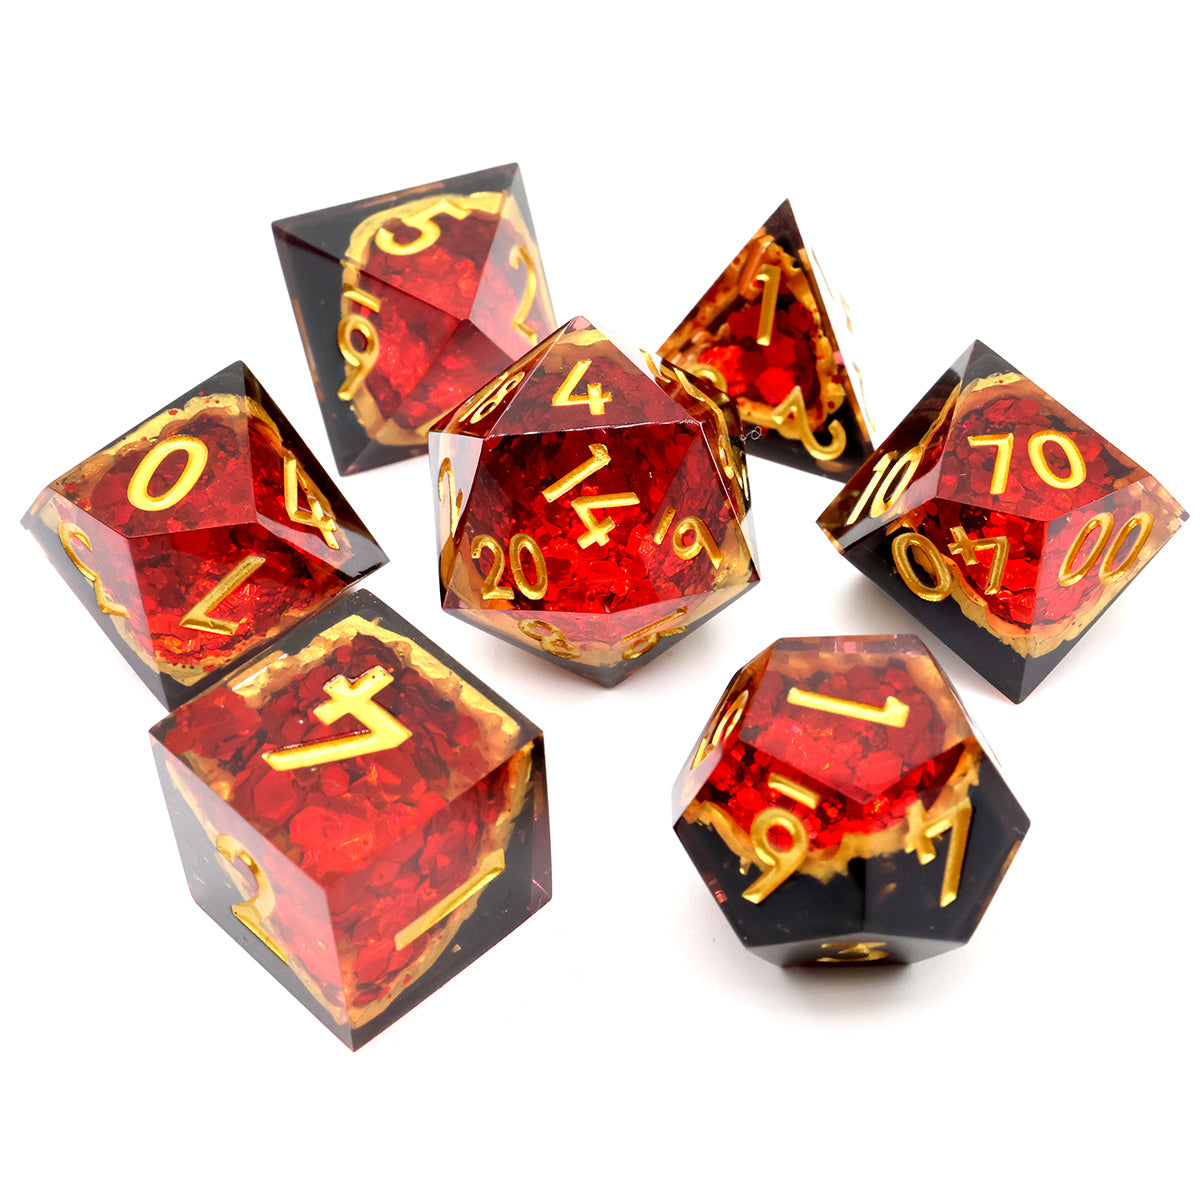 Roll for Sandwich Official Dice Set